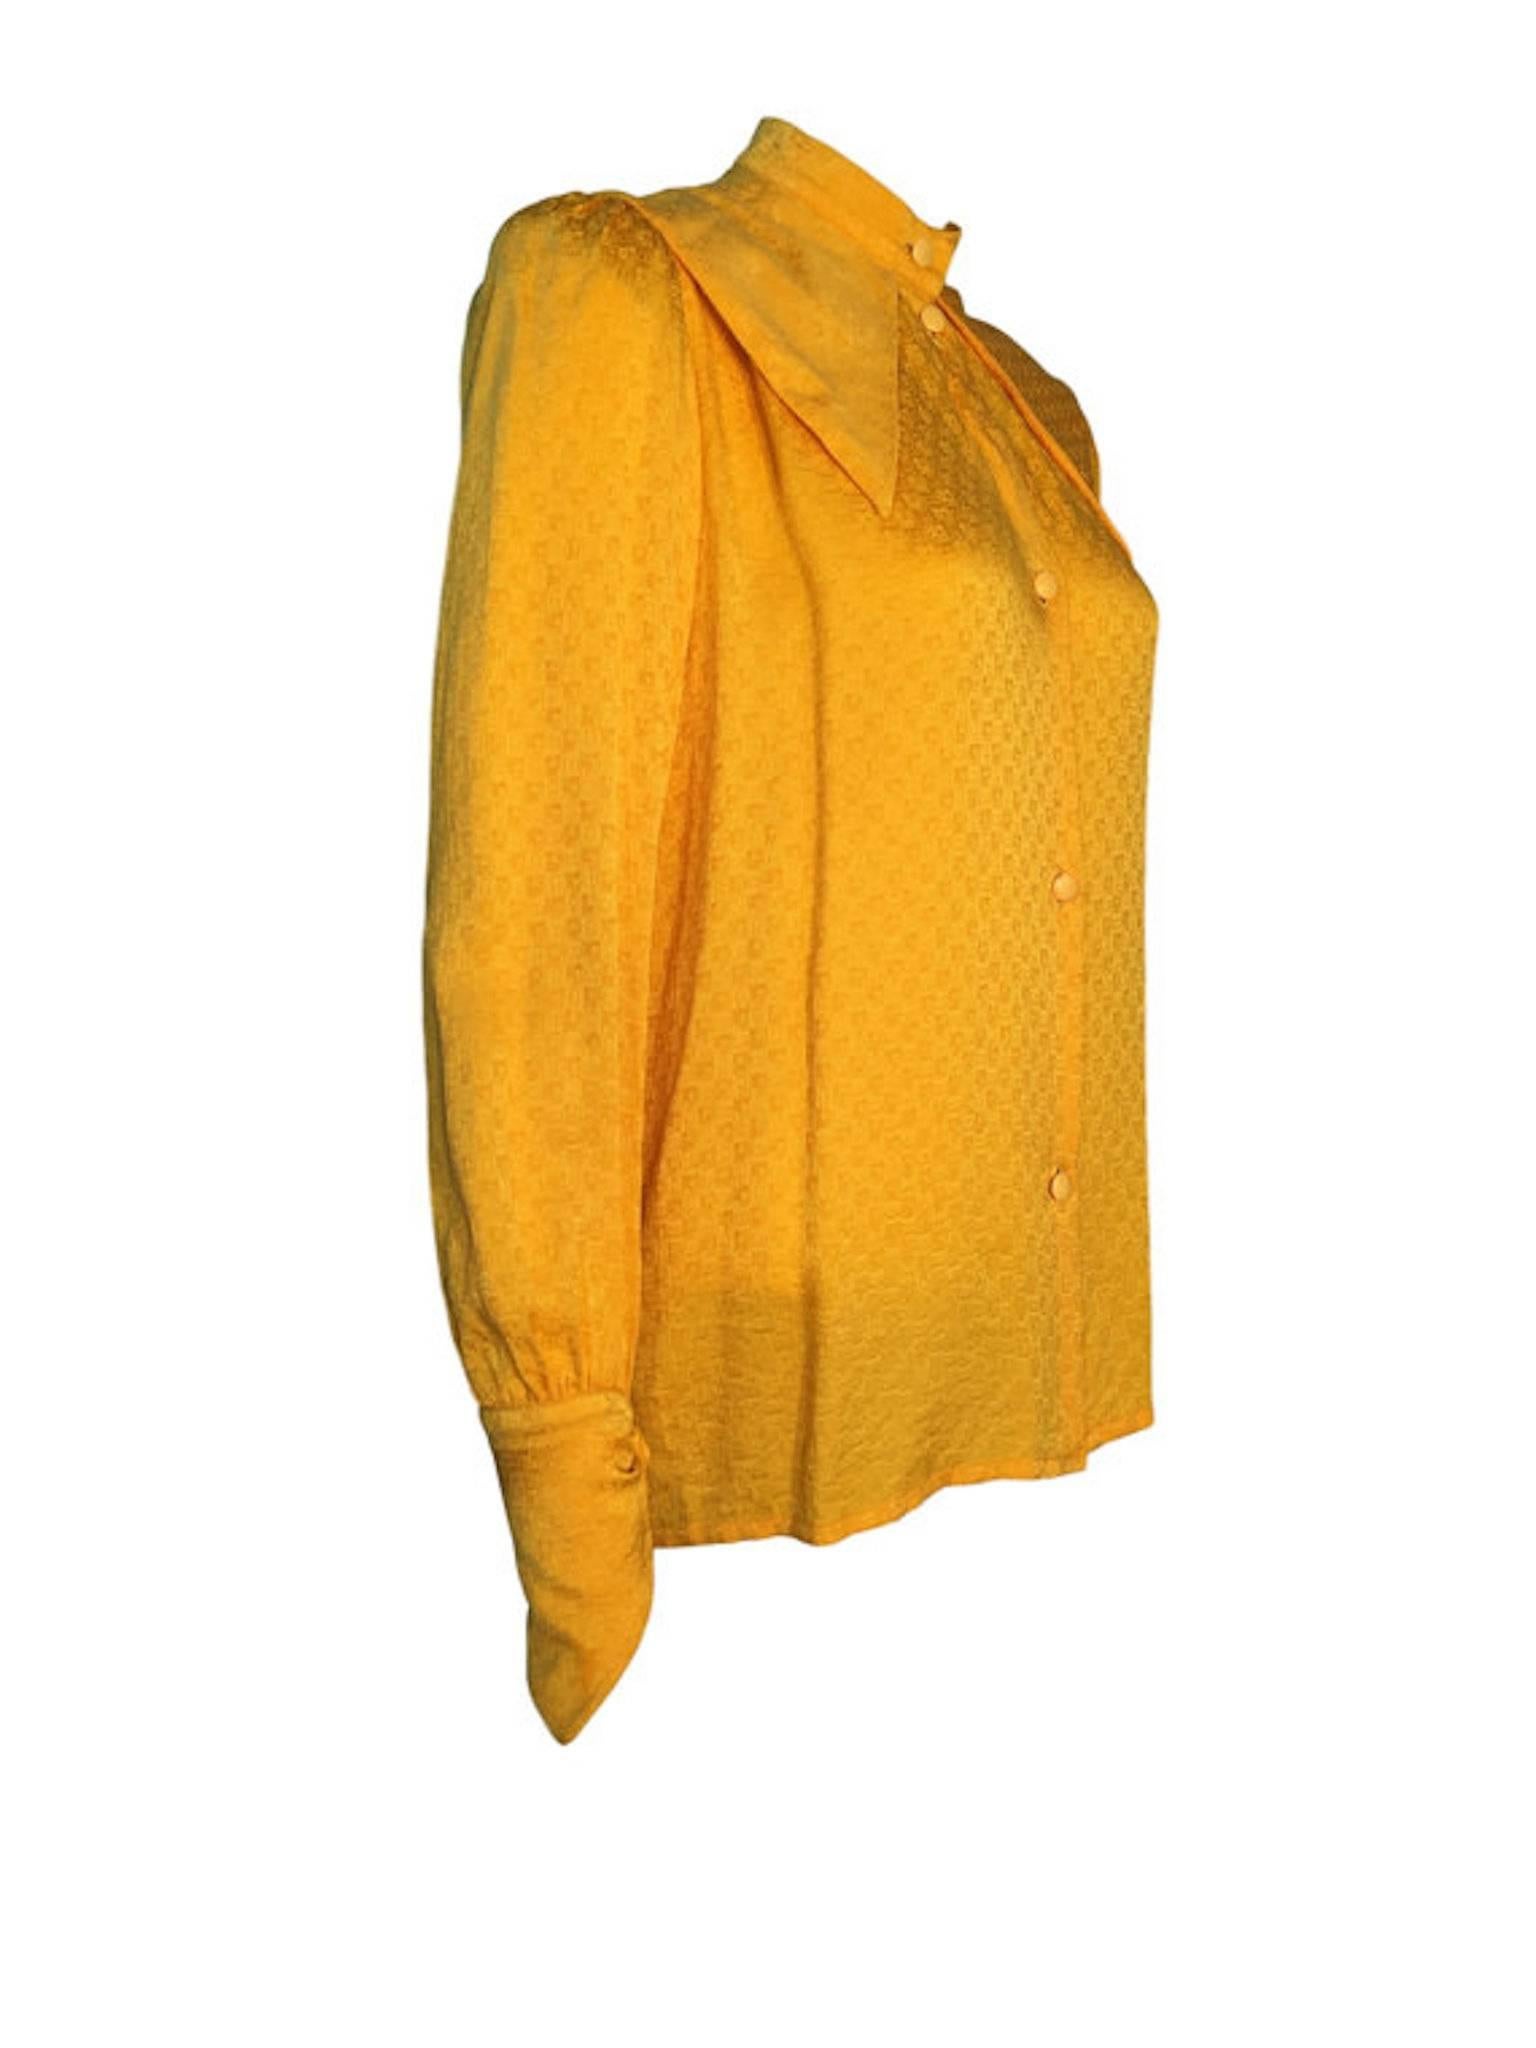 Christian Dior 1970s yellow silk monogrammed blouse, button front, has large collar detail and pointed detail on cuffs.

Size UK 10 Measures: 19 inches across bust and 26 inches length, sleeve measures shoulder seam to cuff 21 inches.

Very good